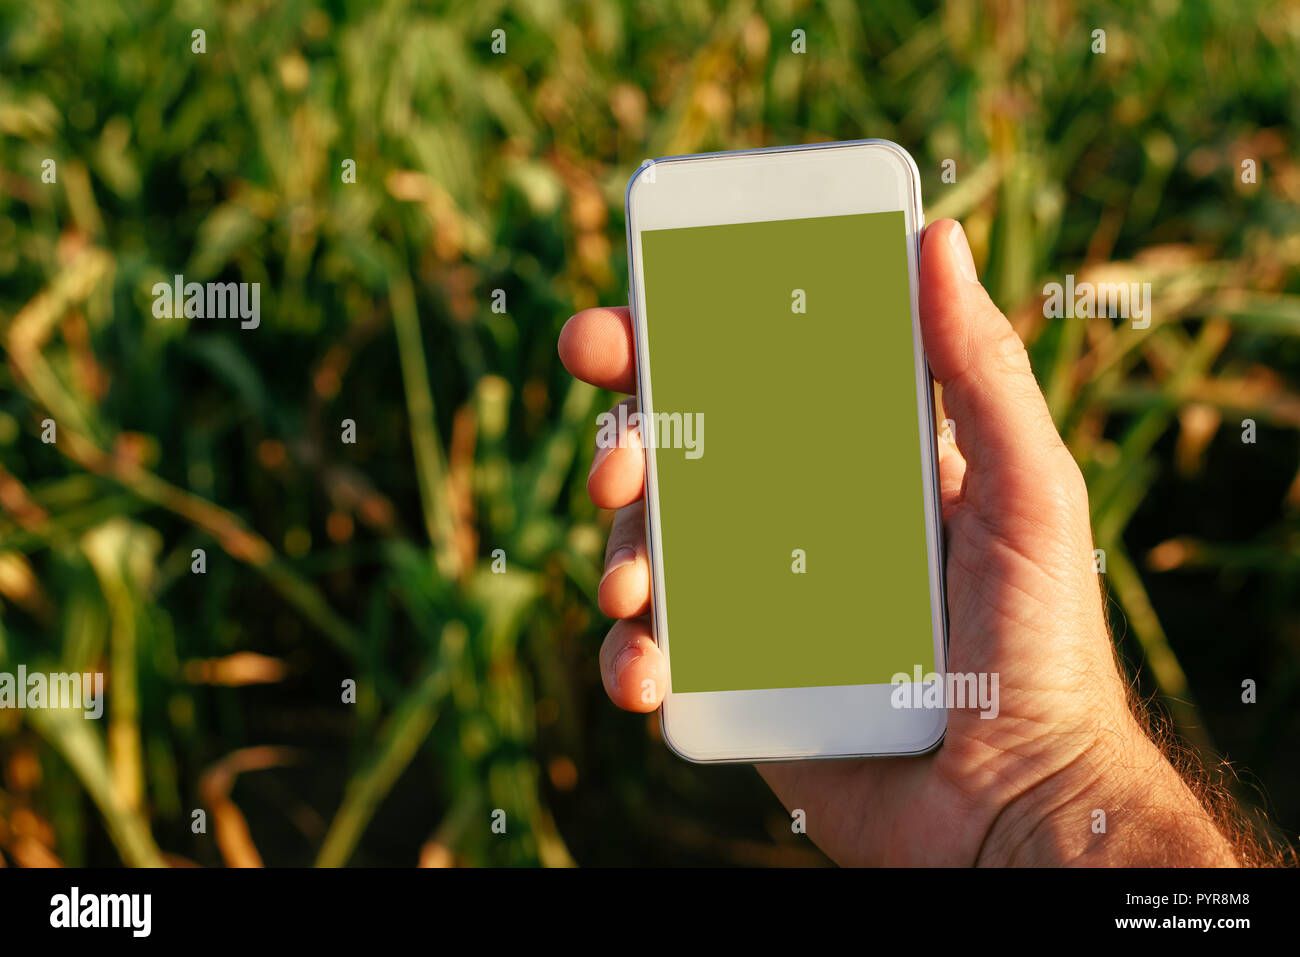 Smart phone agriculture app mock up screen, agronomist holding mobile phone device Stock Photo